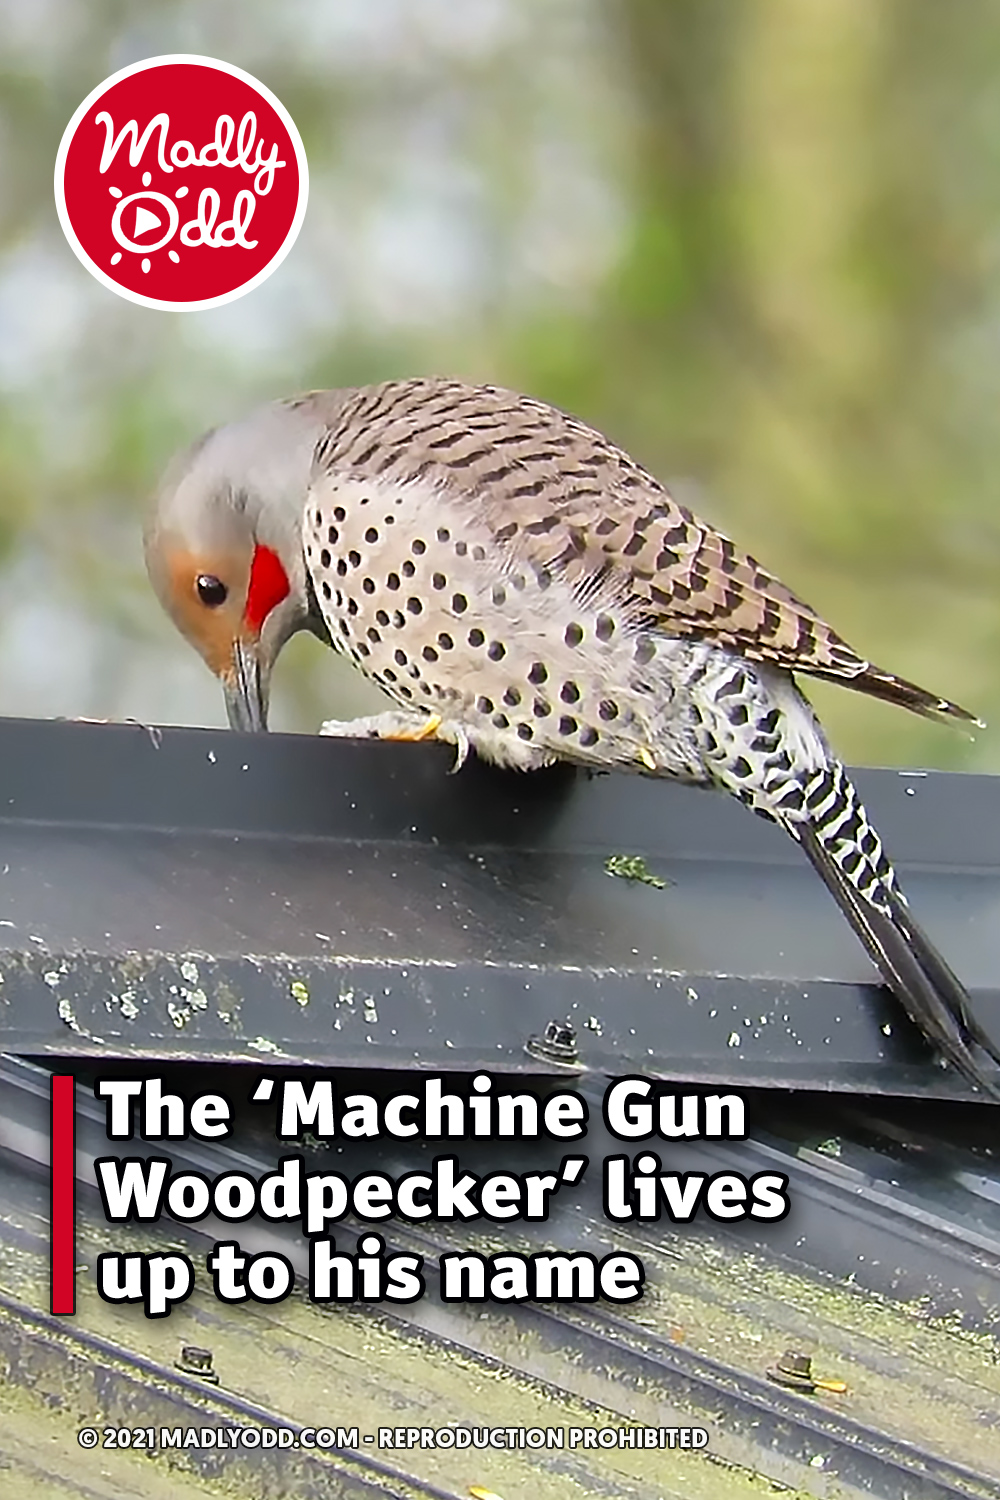 The ‘Machine Gun Woodpecker’ lives up to his name